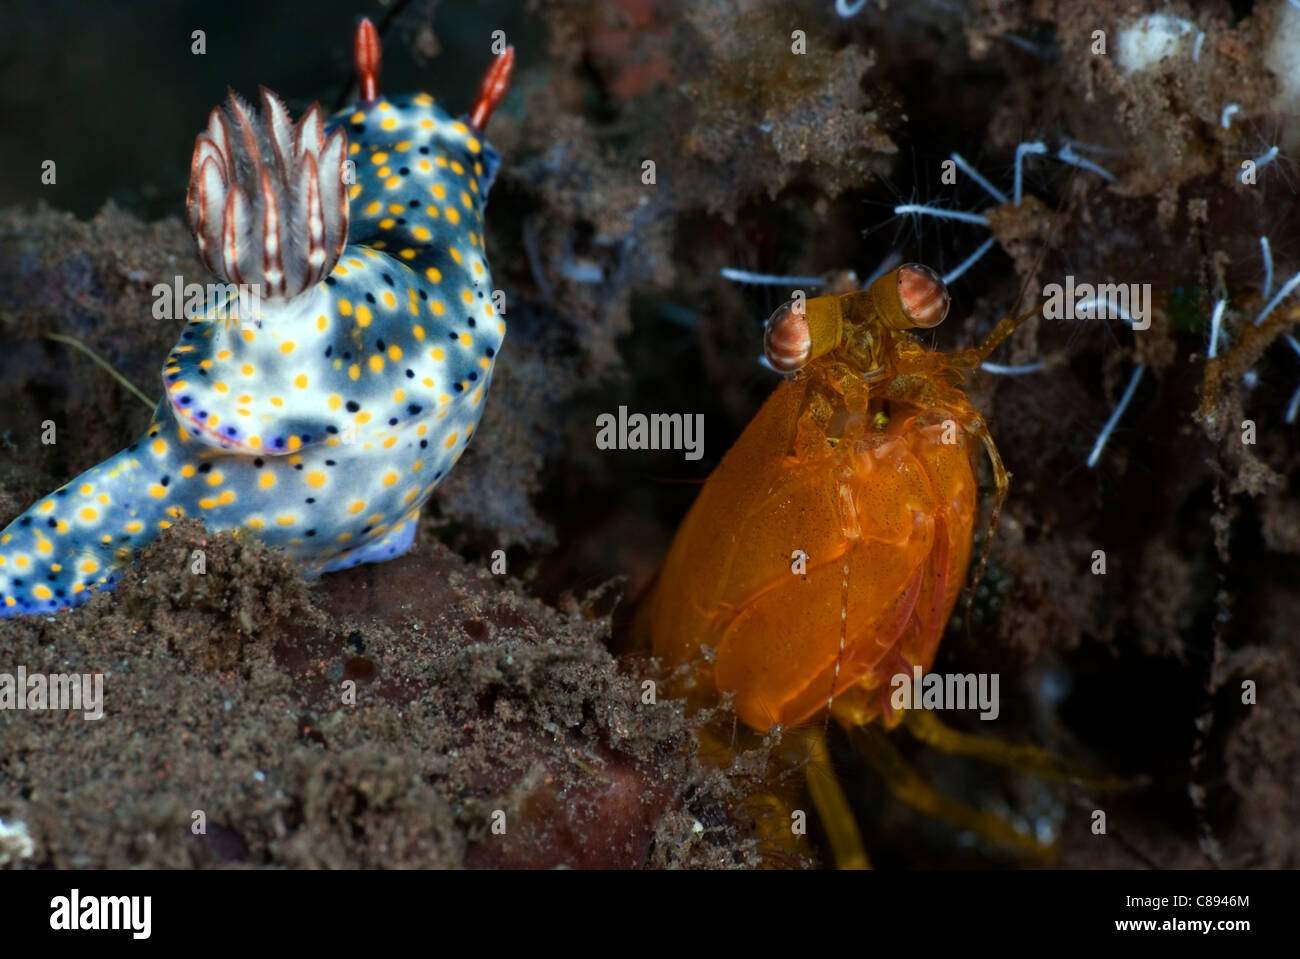 Golden Mantis shrimp watching a White Hypselodoris nudibranch with blue blotches and yellow and black spots and red rhinophores Stock Photo